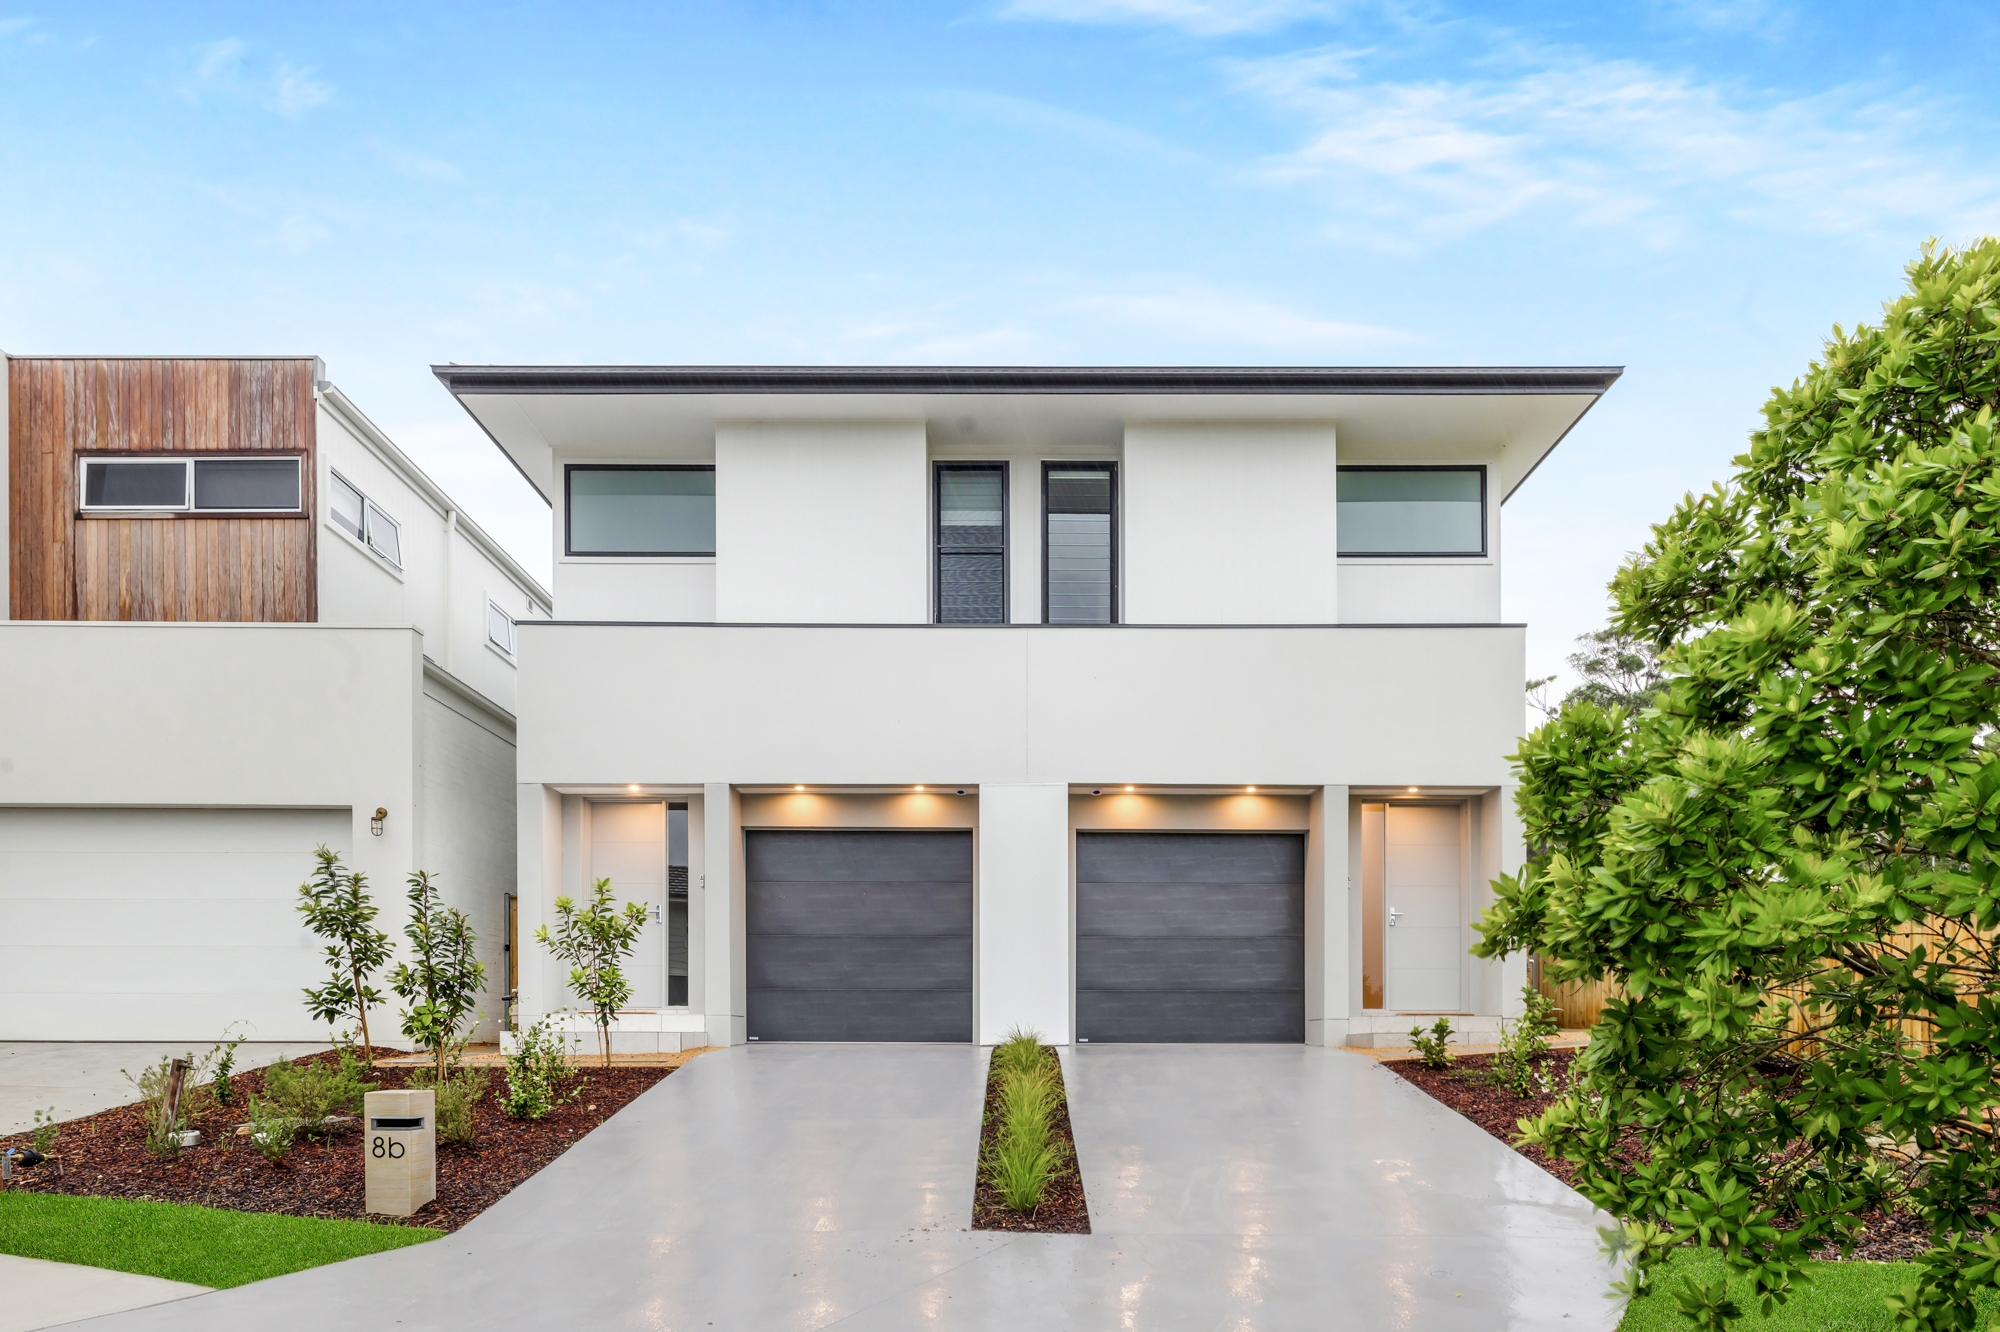 Just launched – 4 Dual Occupancies in Warriewood